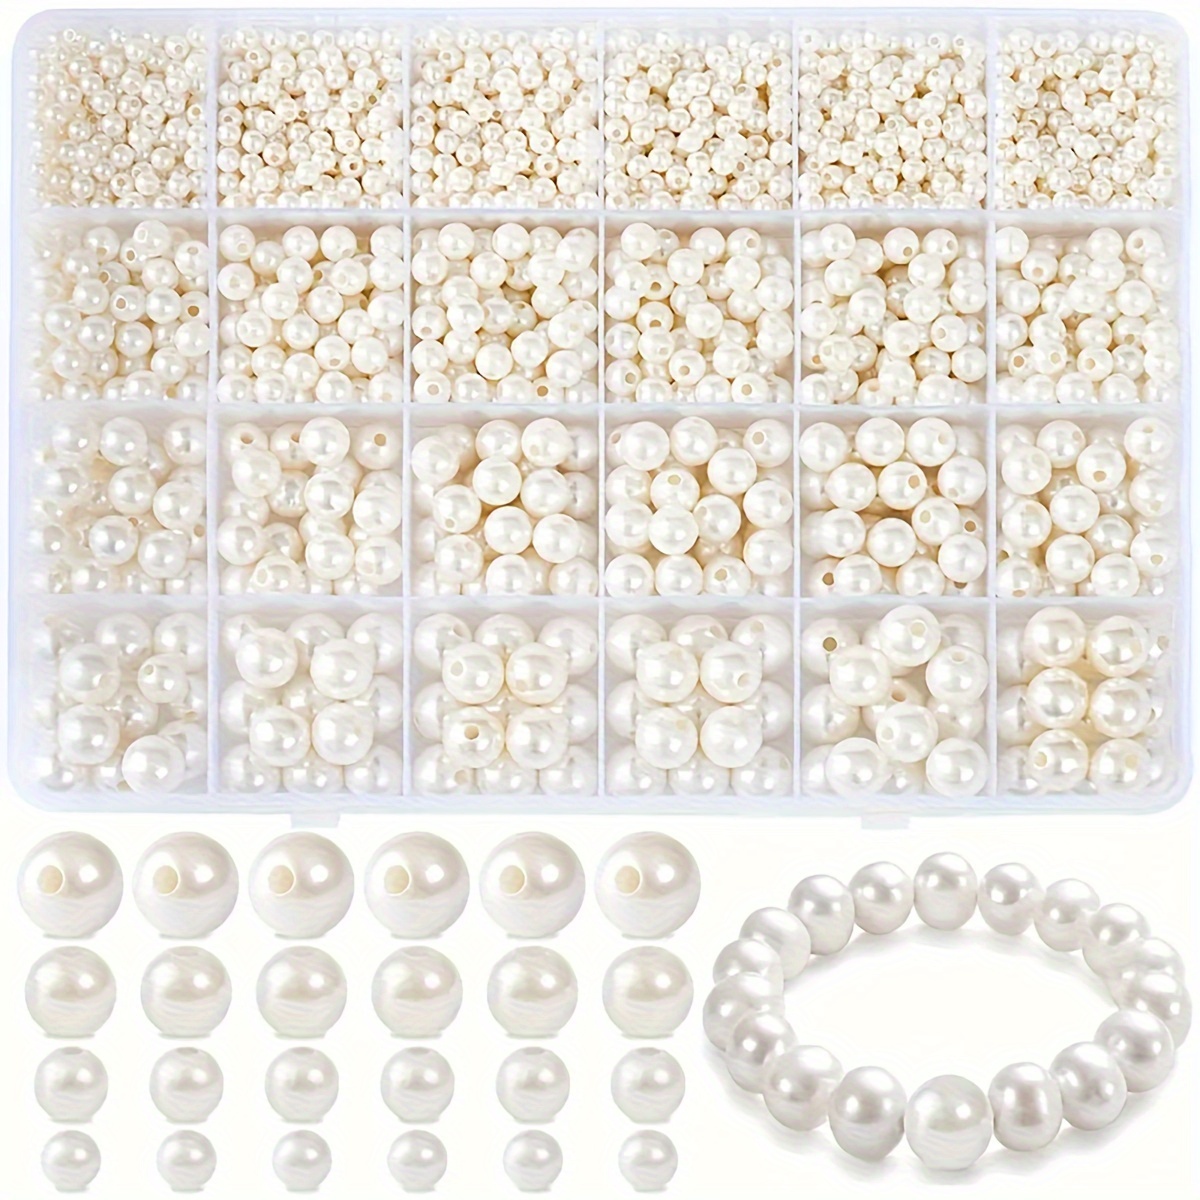 

Elegant 1900-piece White Acrylic Bead Set - Polished Loose Beads In Sizes 4mm, 6mm, 8mm, 10mm For Diy Jewelry Making, Bracelets & Craft Decorations Craft Personalized Gifts That Impress